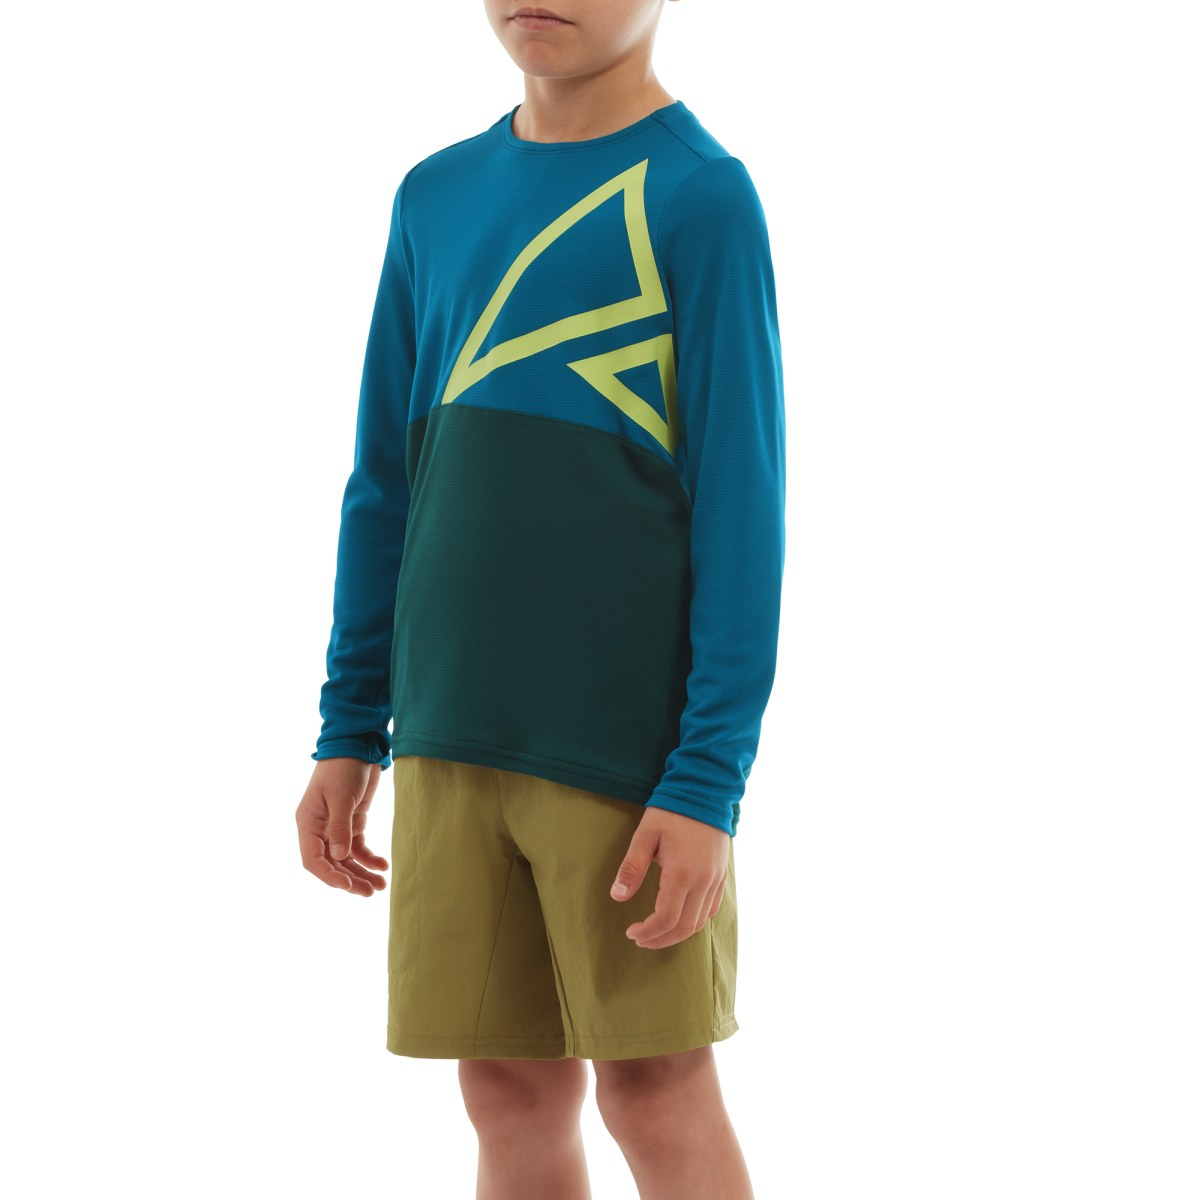 Altura  Spark Lightweight Kids Long Sleeve Jersey 7 to 8 Years BLUE/TEAL